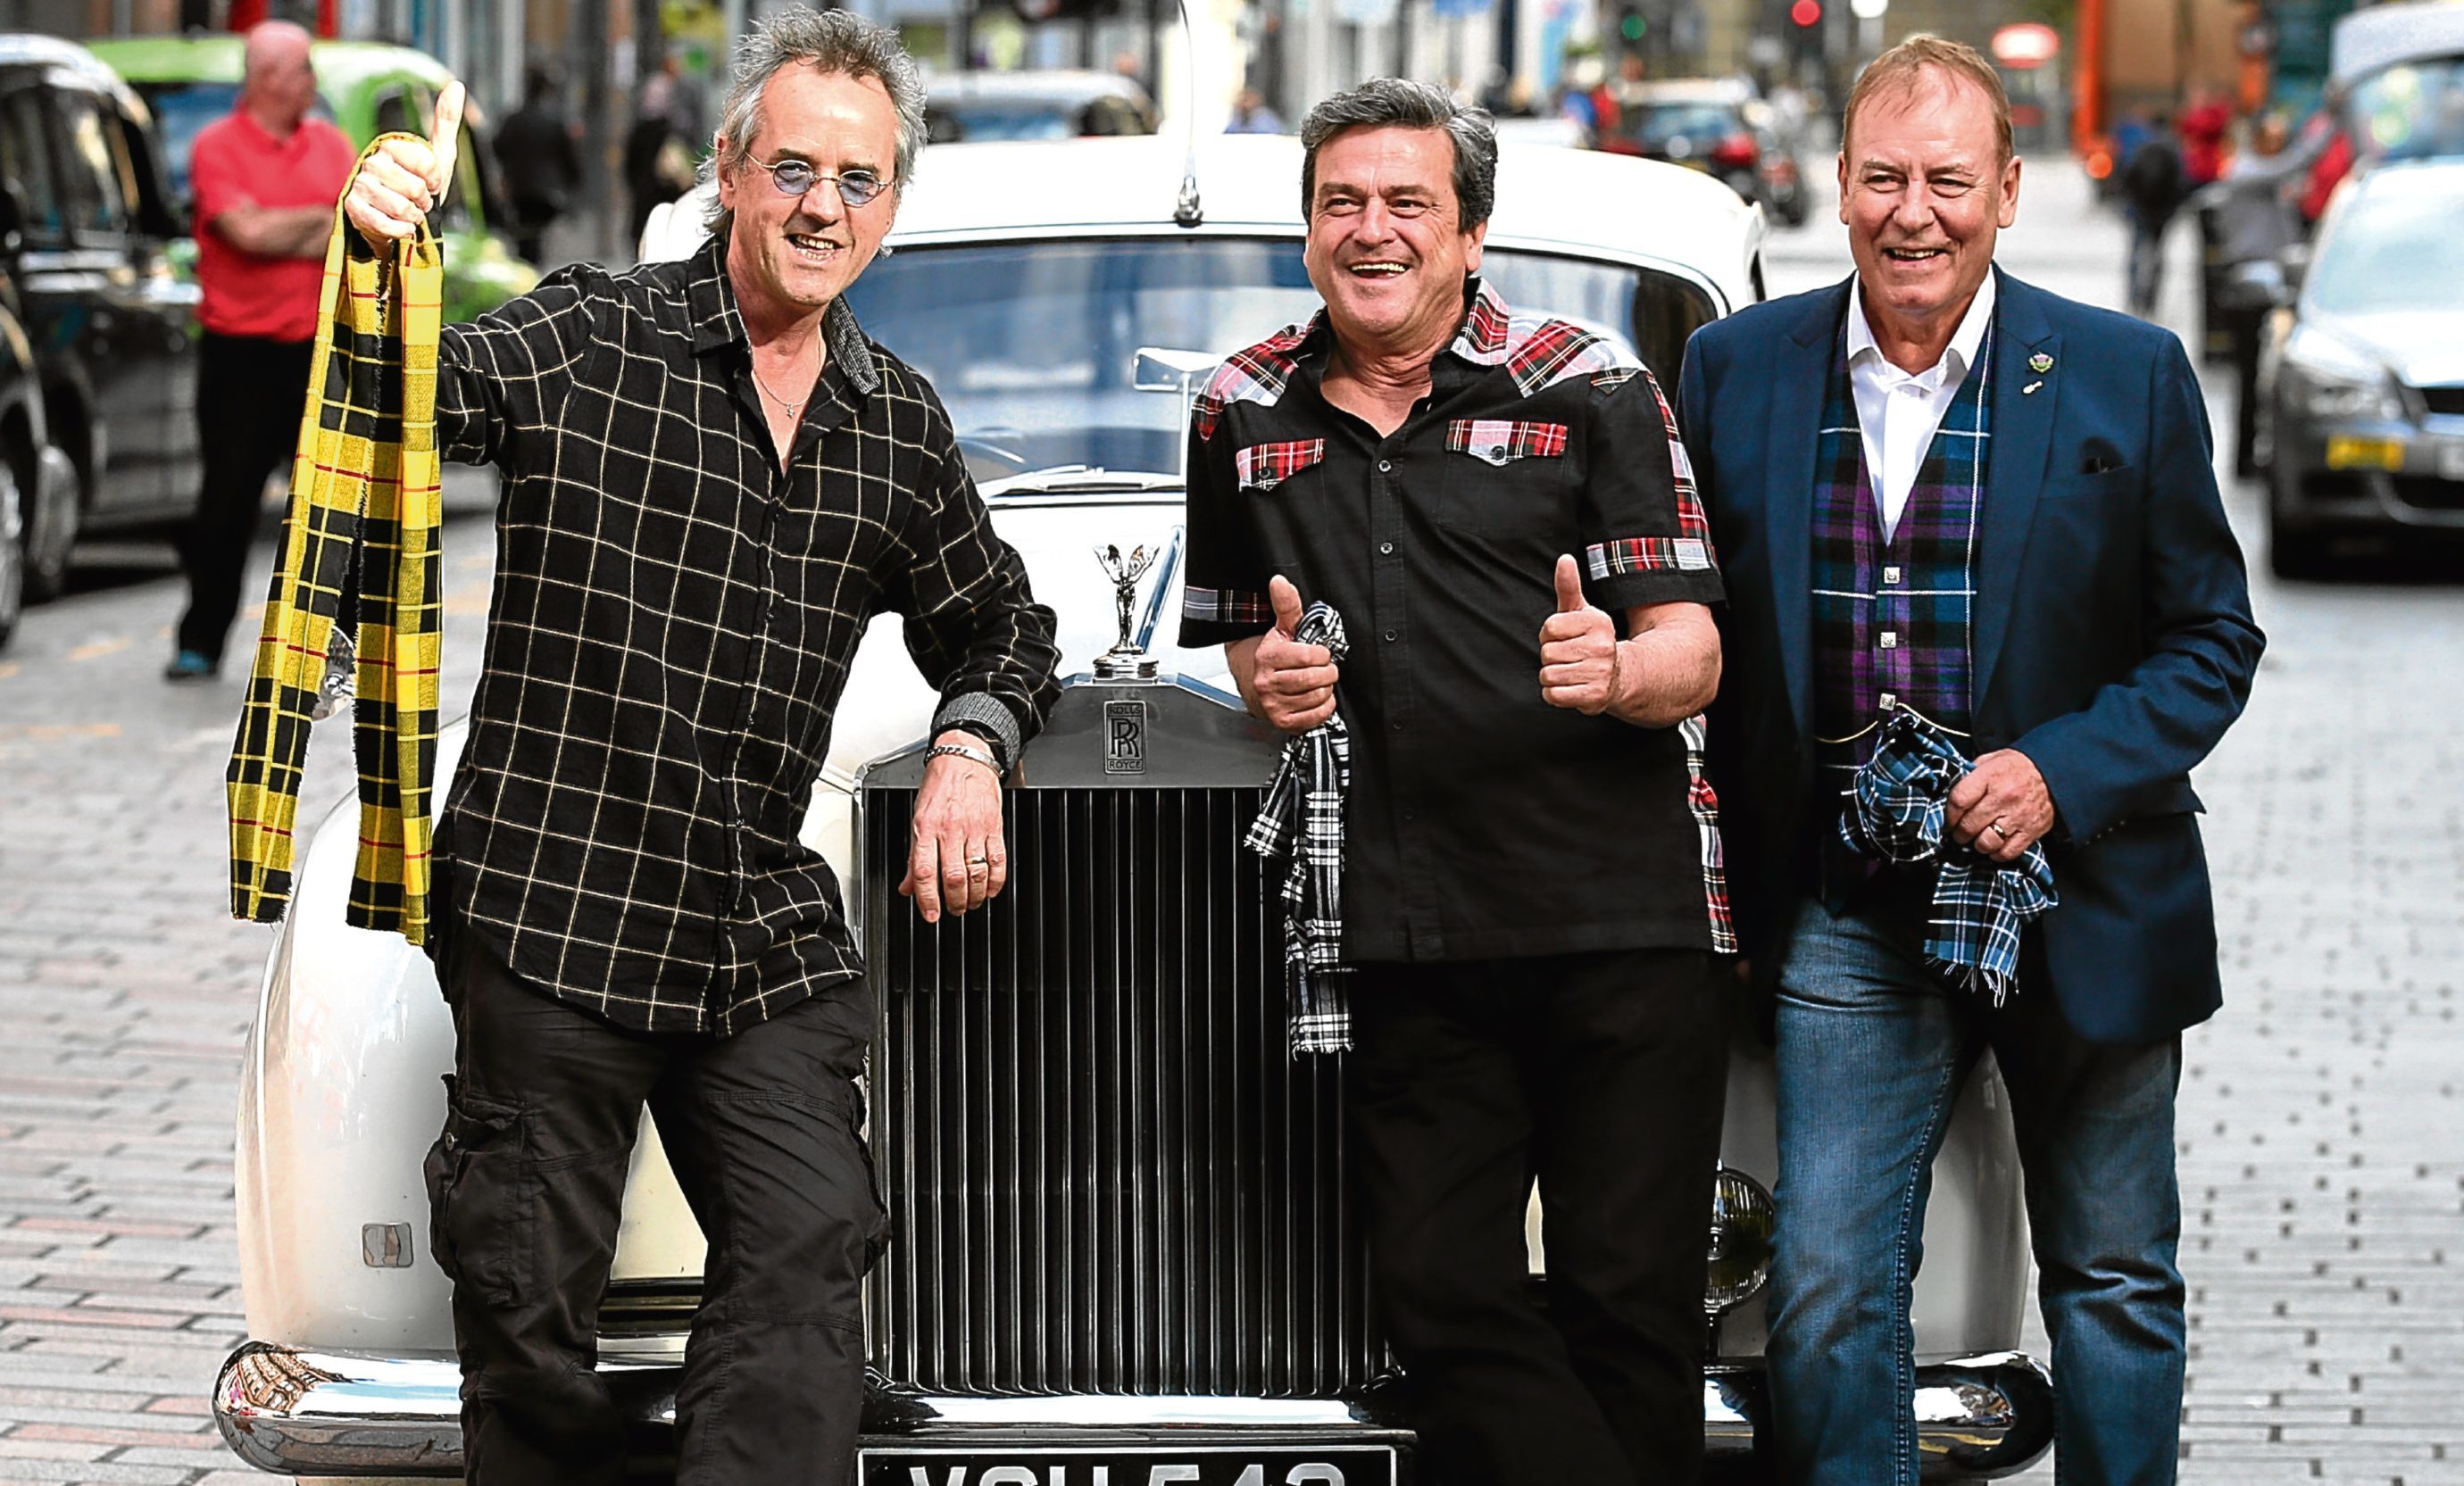 Bay City Rollers (left to right)  Stuart Wood, Les McKeown and Alan Longmuir (Andrew Milligan/PA Wire)